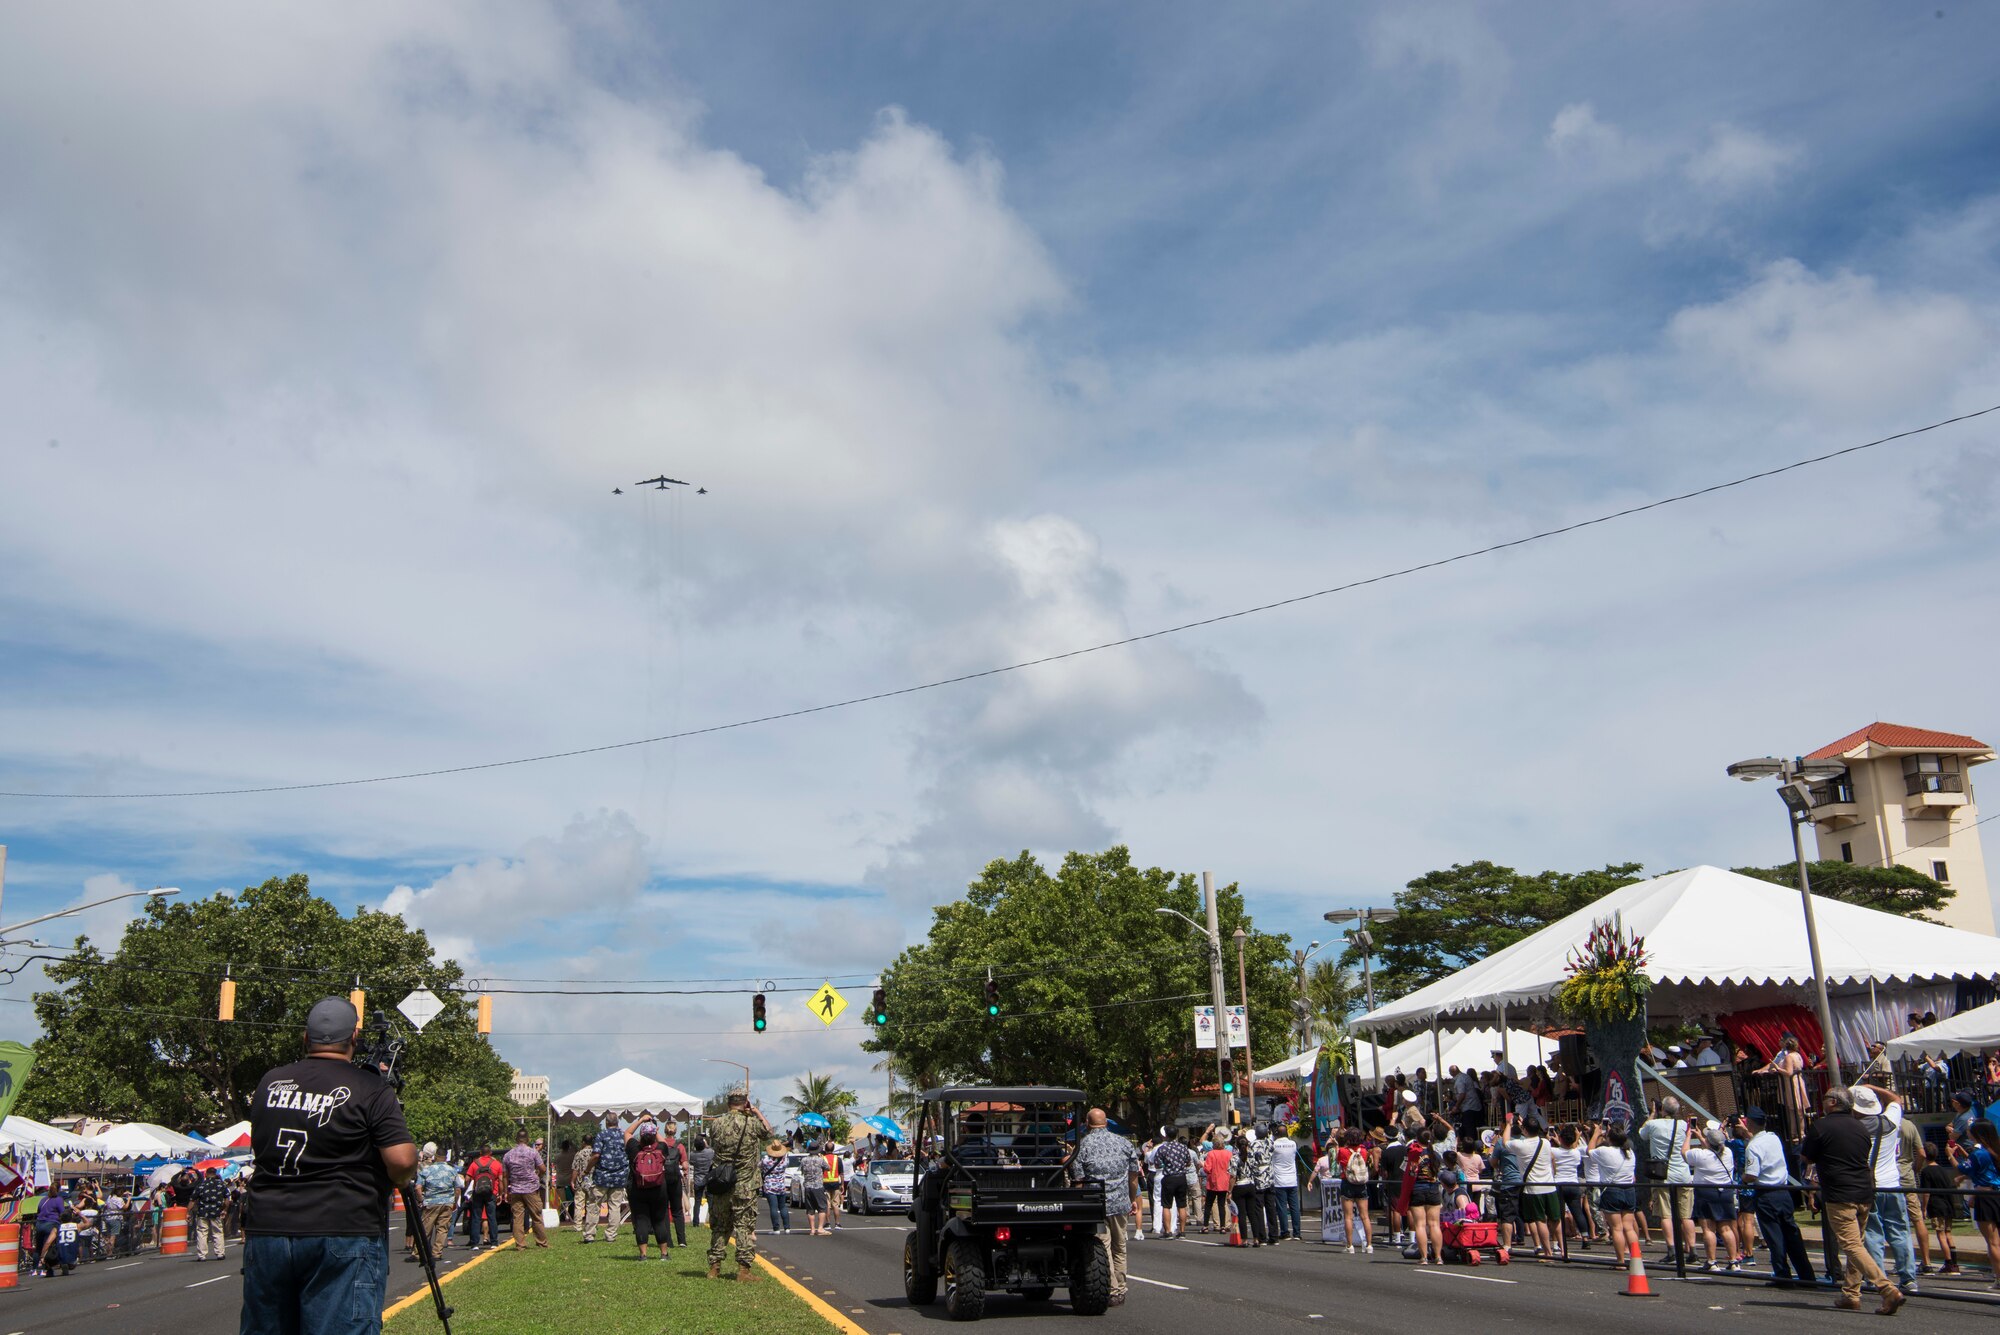 Members of the local community watch a B-52 Stratofortress and two F-15 Eagles fly over Hagatna, Guam during the 75th Liberation Day July 21, 2019.